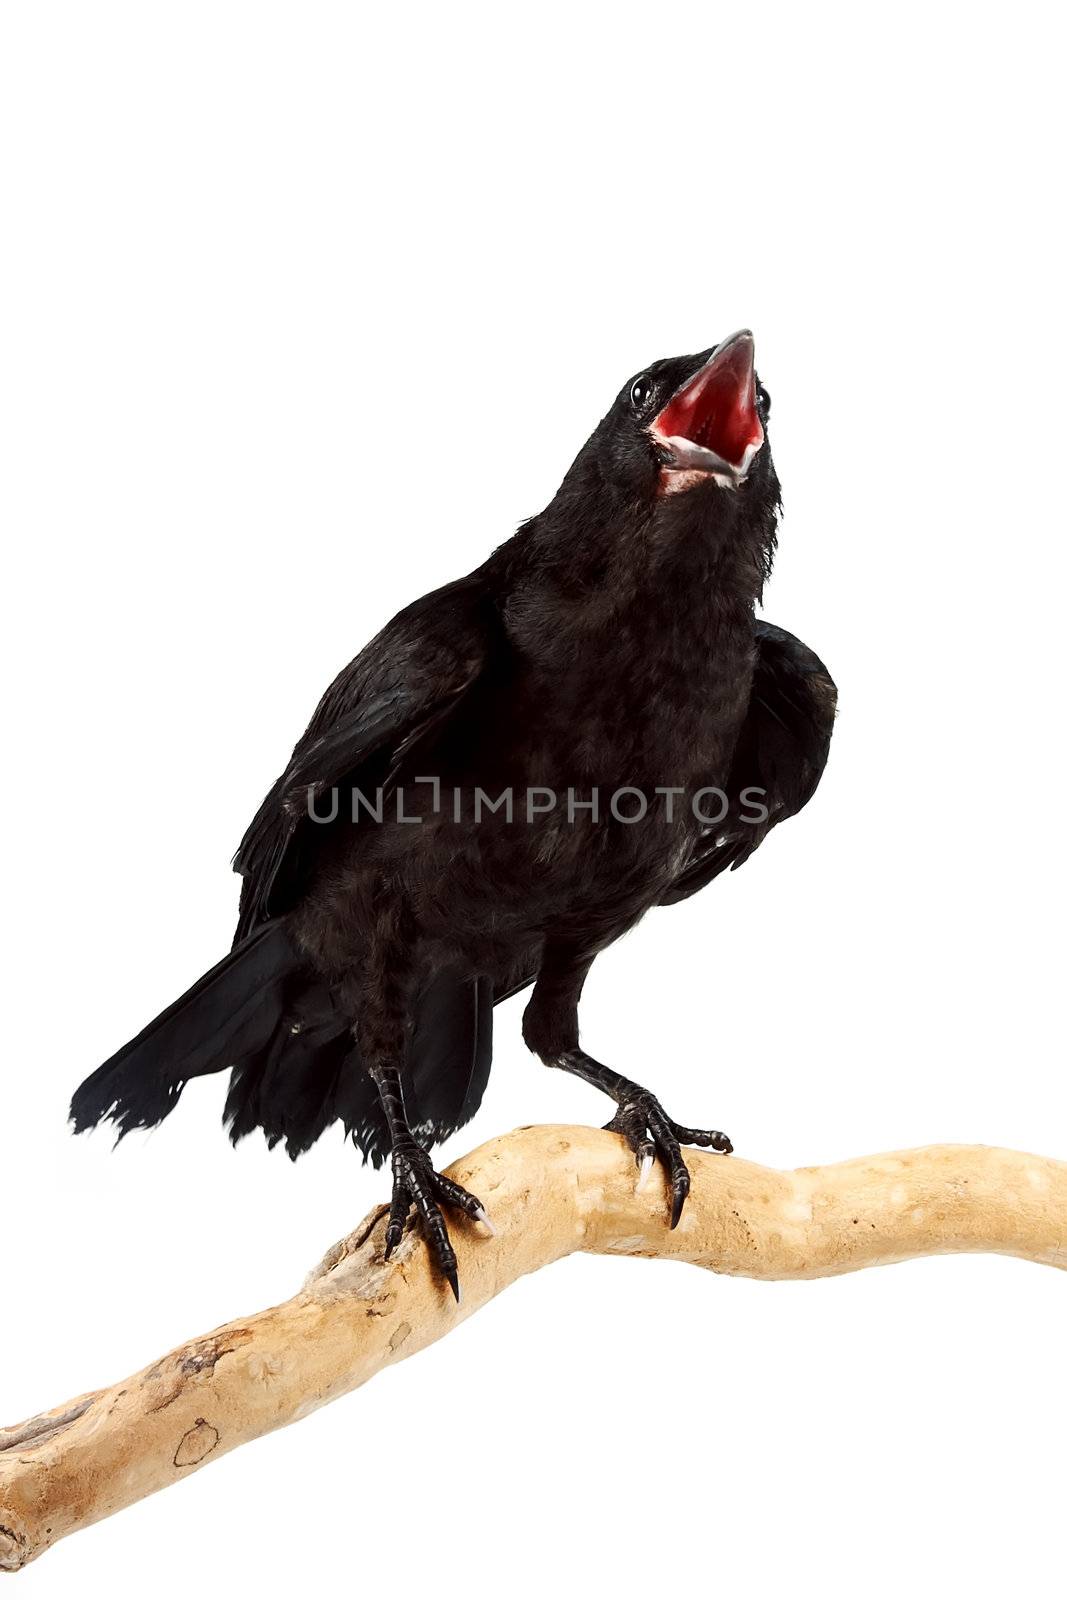 The bird a rook sits on a branch on a white background